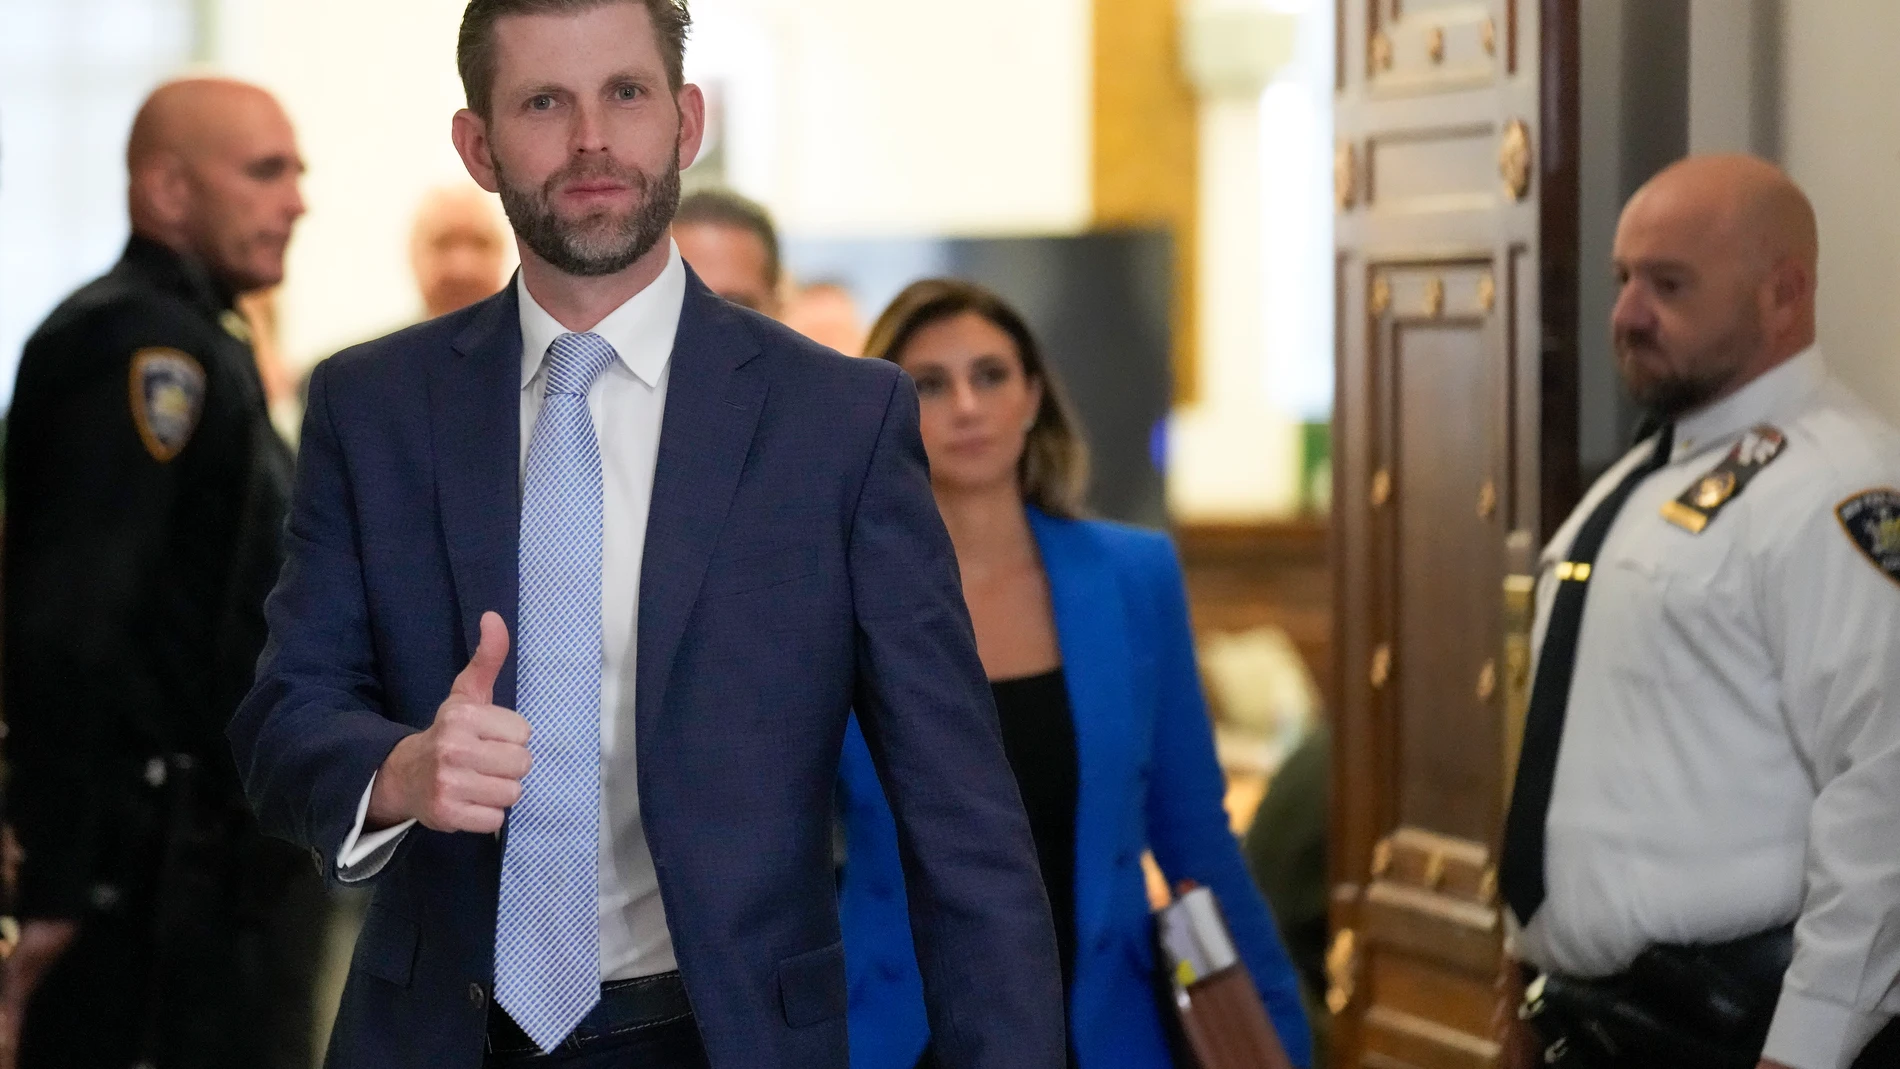 Eric Trump steps out of the courtroom during a break in proceedings at New York Supreme Court, Thursday, Nov. 2, 2023, in New York. (AP Photo/Seth Wenig)